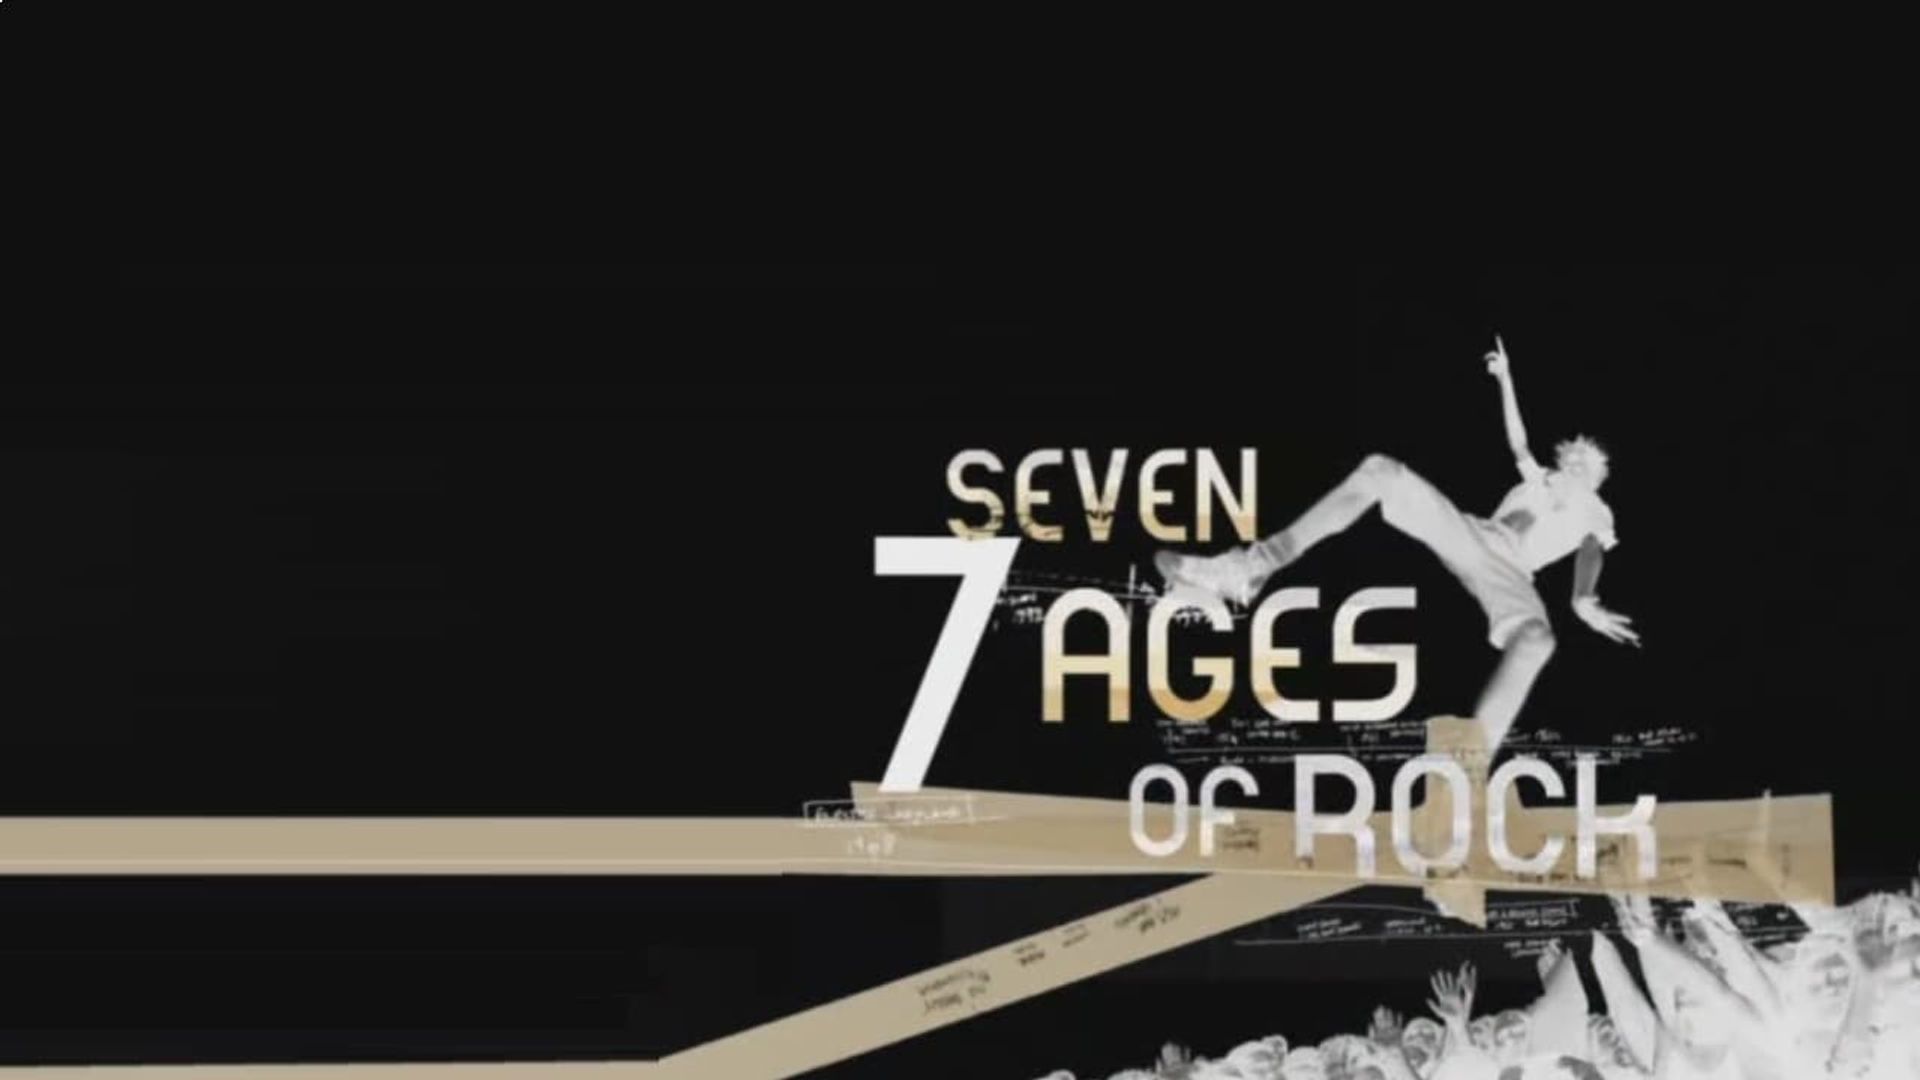 Seven Ages of Rock background